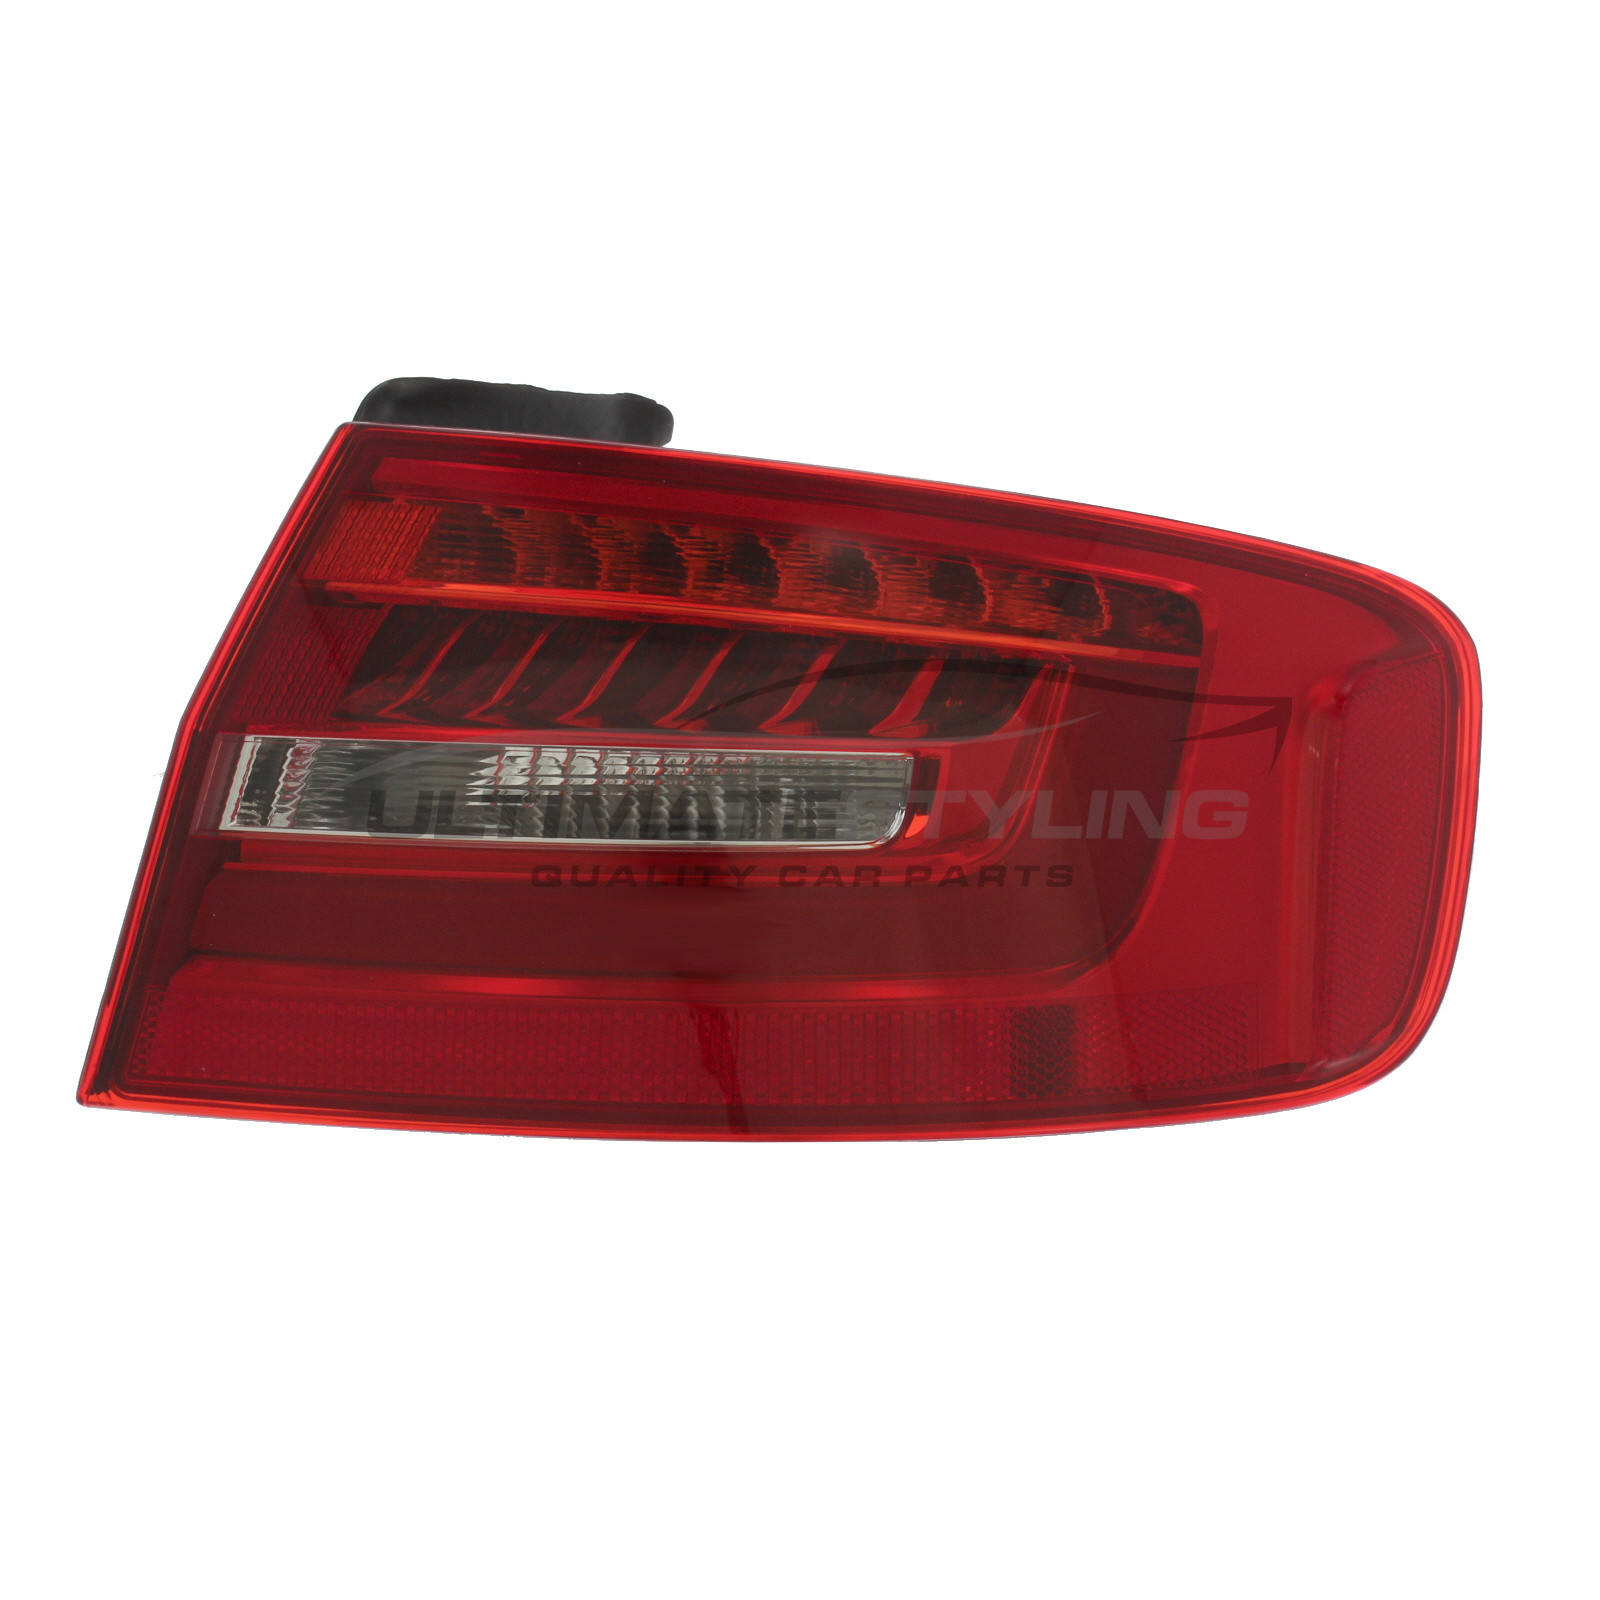 Audi A4 2011-2016 / Audi S4 2011-2016 LED Outer (Wing) Rear Light / Tail Light Excluding Bulb Holder Drivers Side (RH)